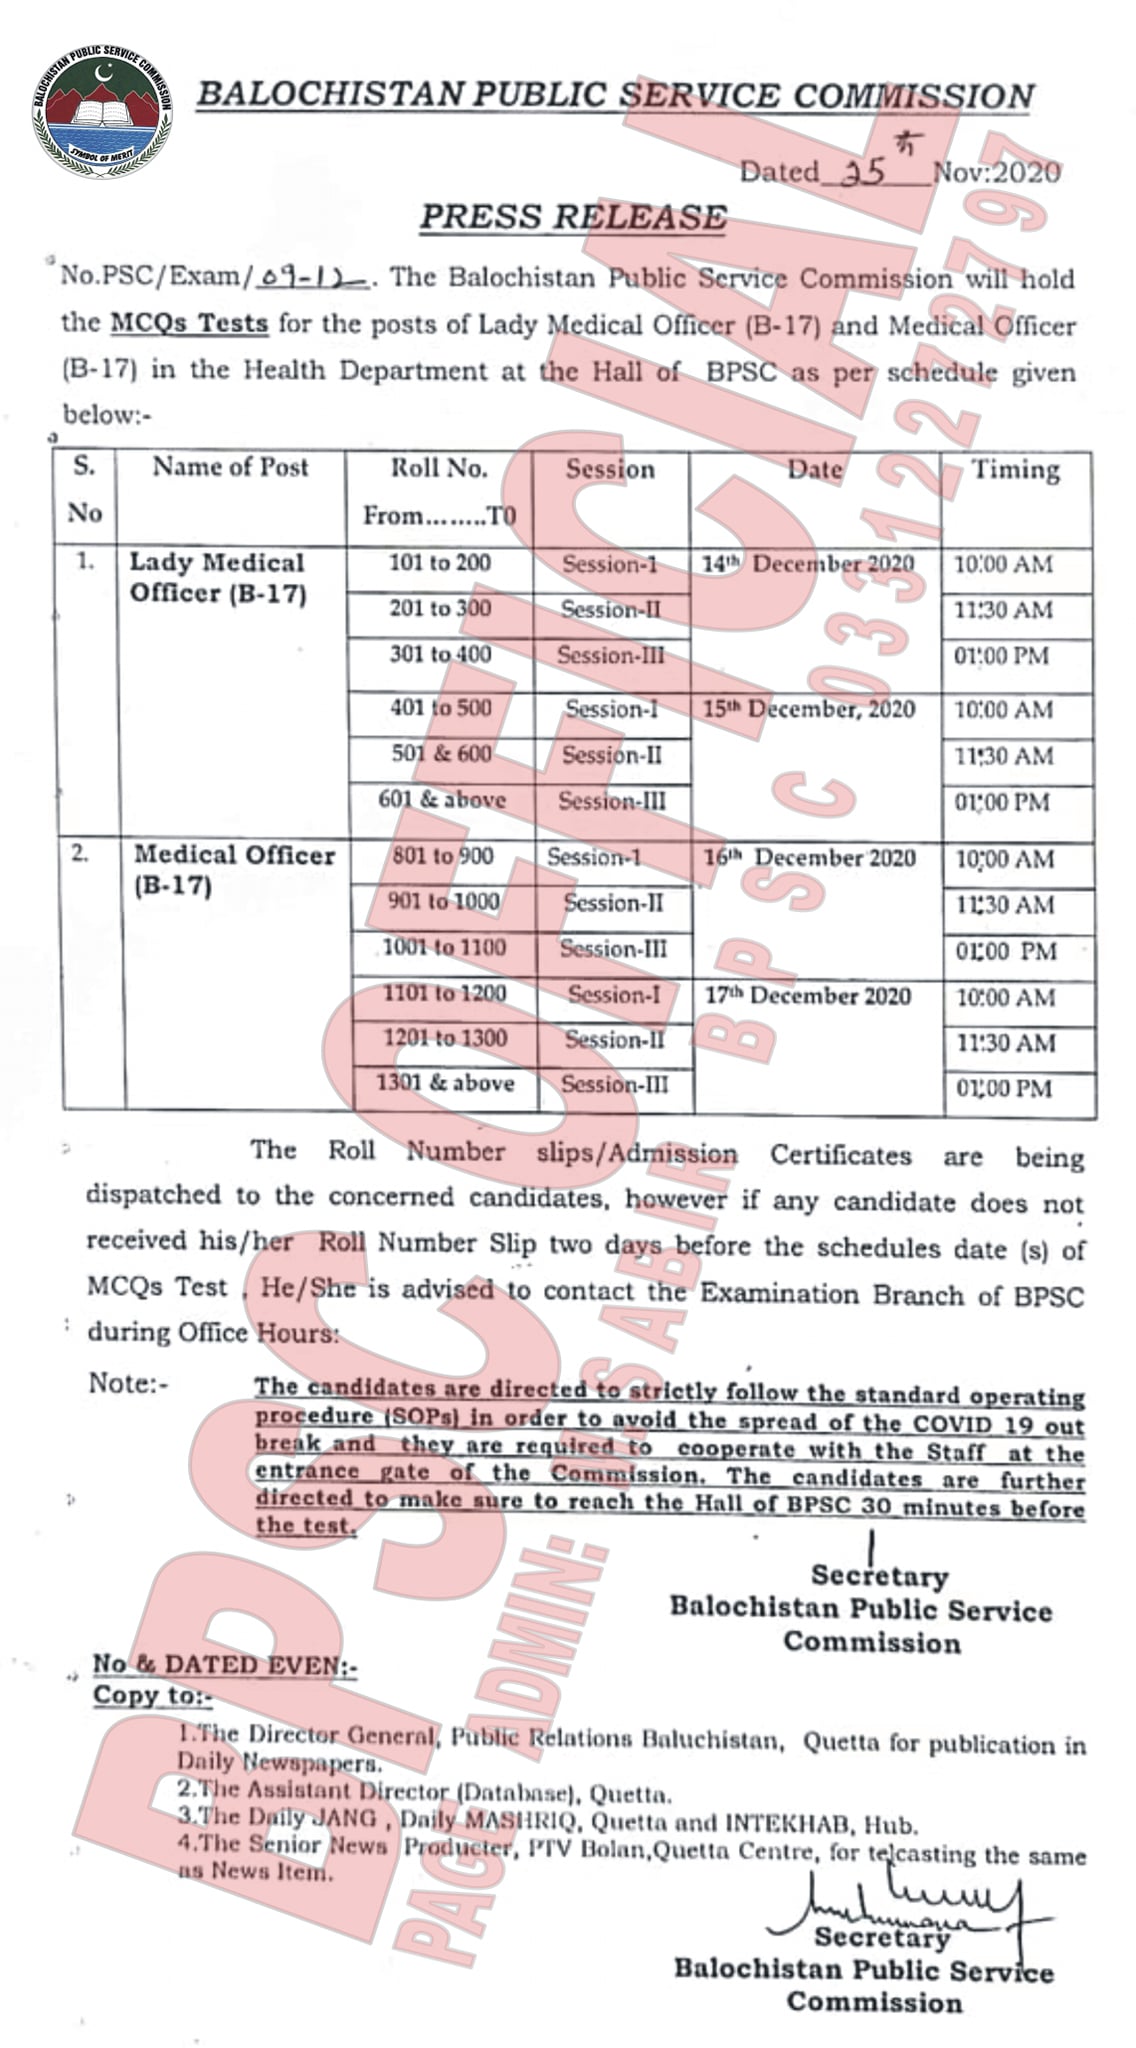 BPSC Lady Medical Officer & Medical Officer MCQs Tests Schedule